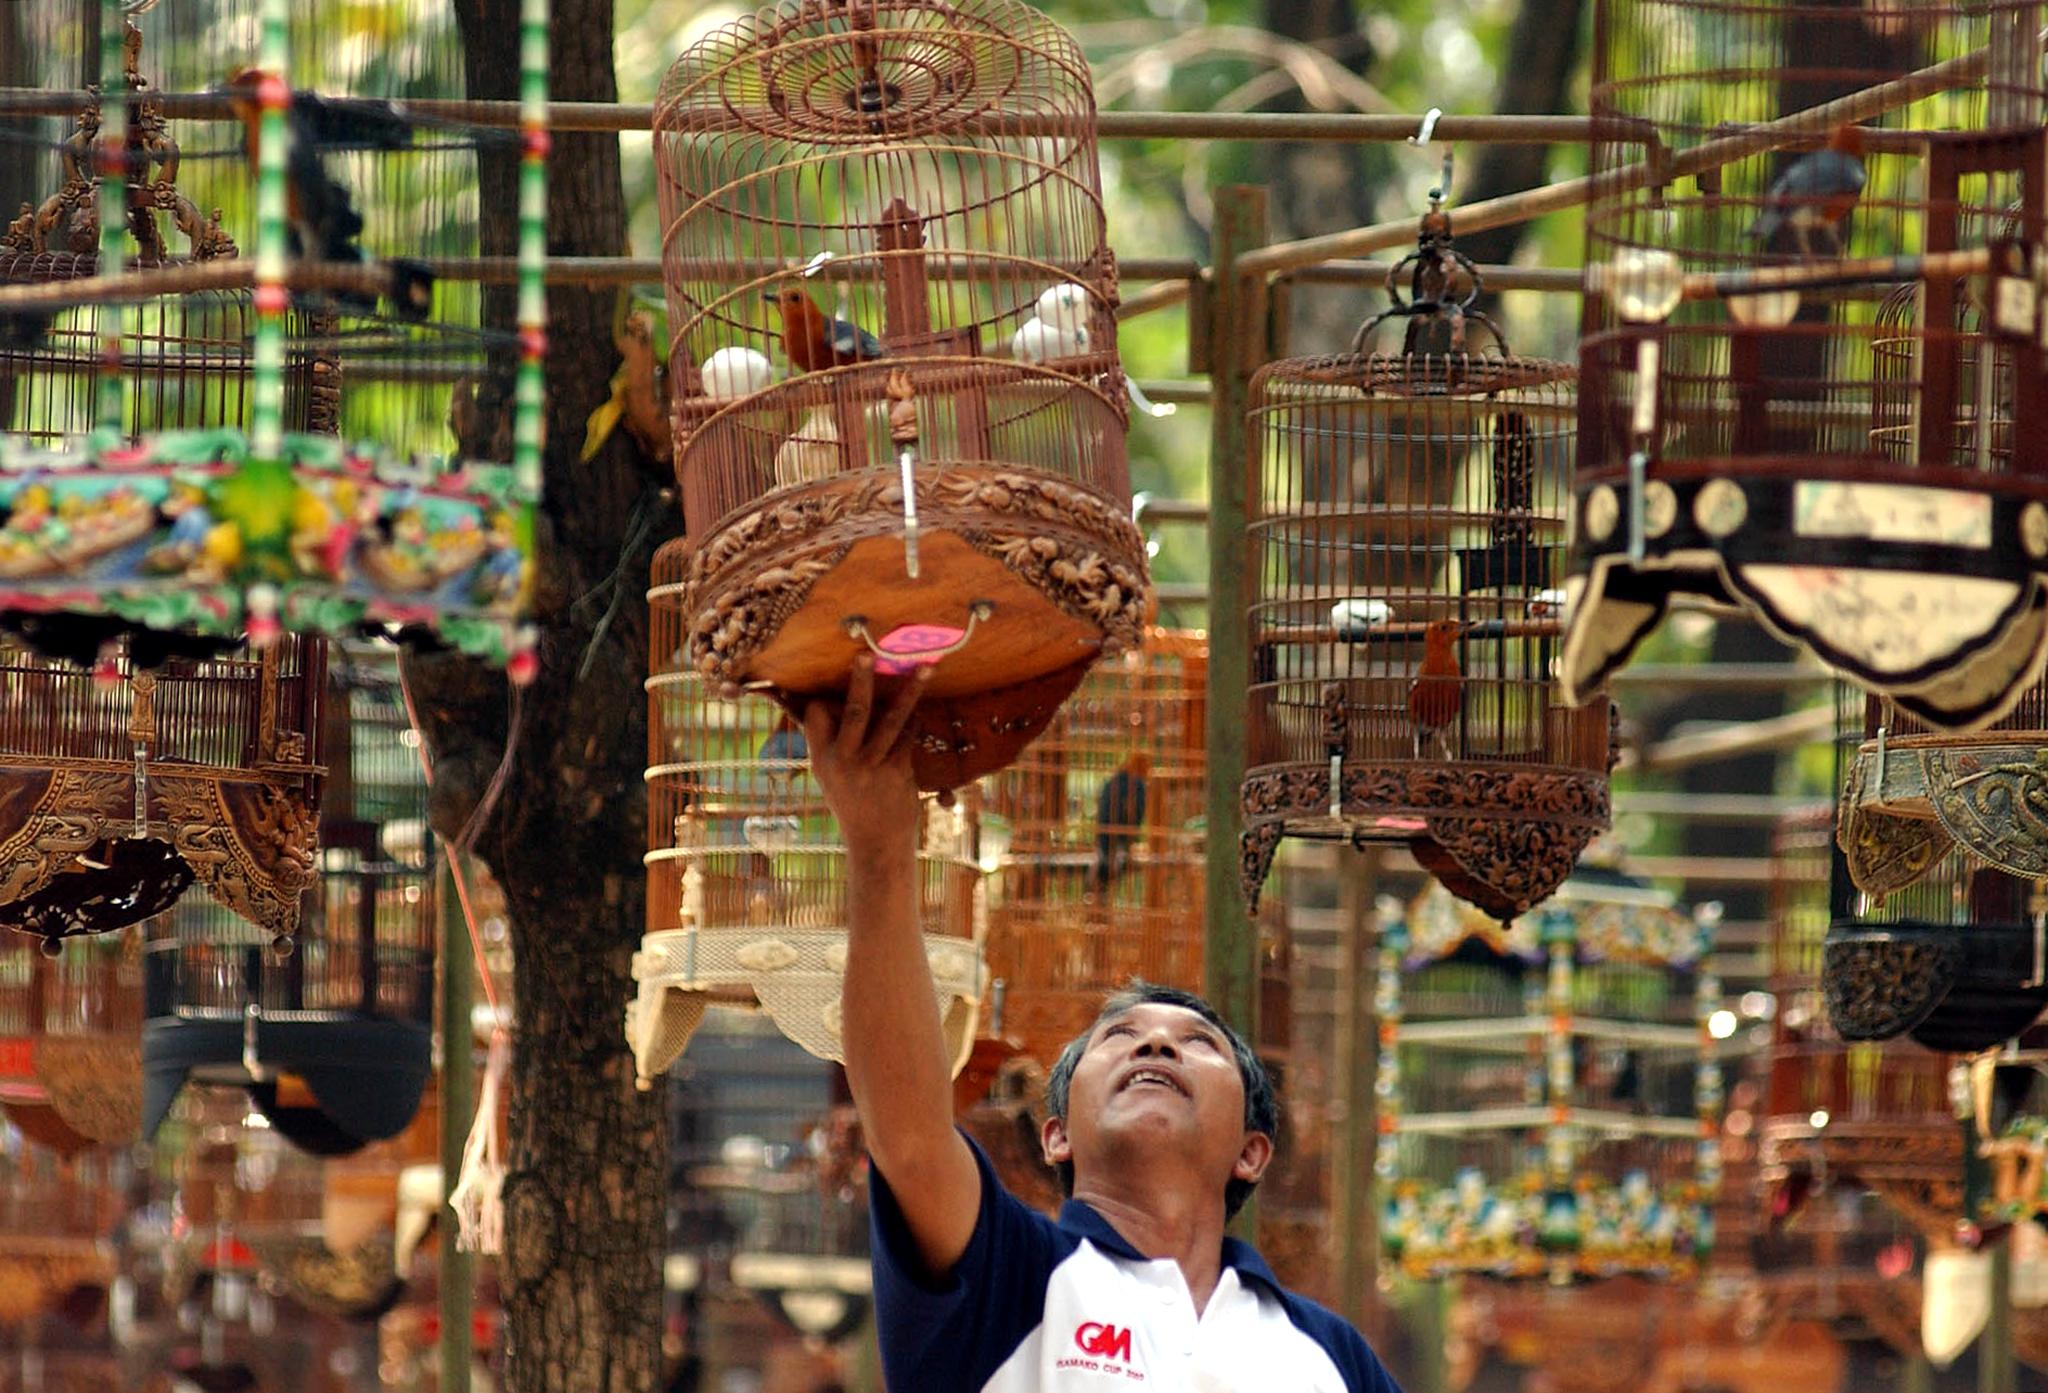 An Indonesian bird lover tries to coaxe his bird to sing during a singing bird contest involving more than 5,000 birds from some 40 species held at Jakarta's sprawling Ancol recreation park 30 June 2002 as part of events to mark the Indonesian capital's 475 anniversary. Singing birds are very much appreciated in Indonesia with some champion birds fetching thousands of dollars on the market.  AFP PHOTO/Weda / AFP PHOTO / WEDA